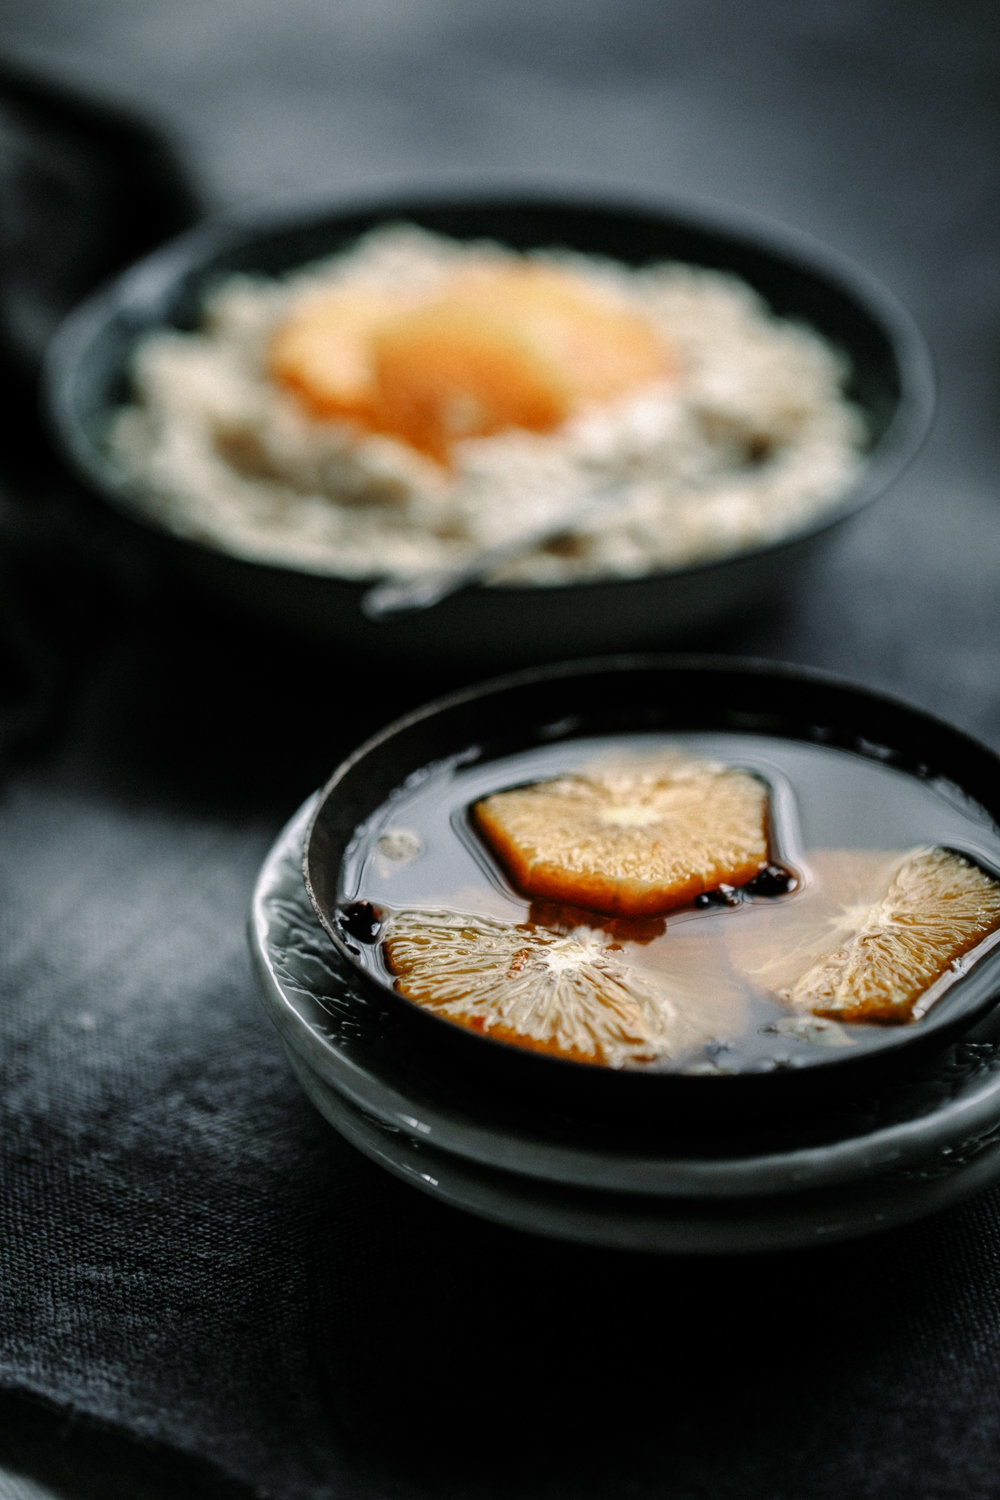 Rice Pudding With Rum Soaked Oranges - Anisa Sabet - The Macadames - Food Travel Lifestyle Photographer-299